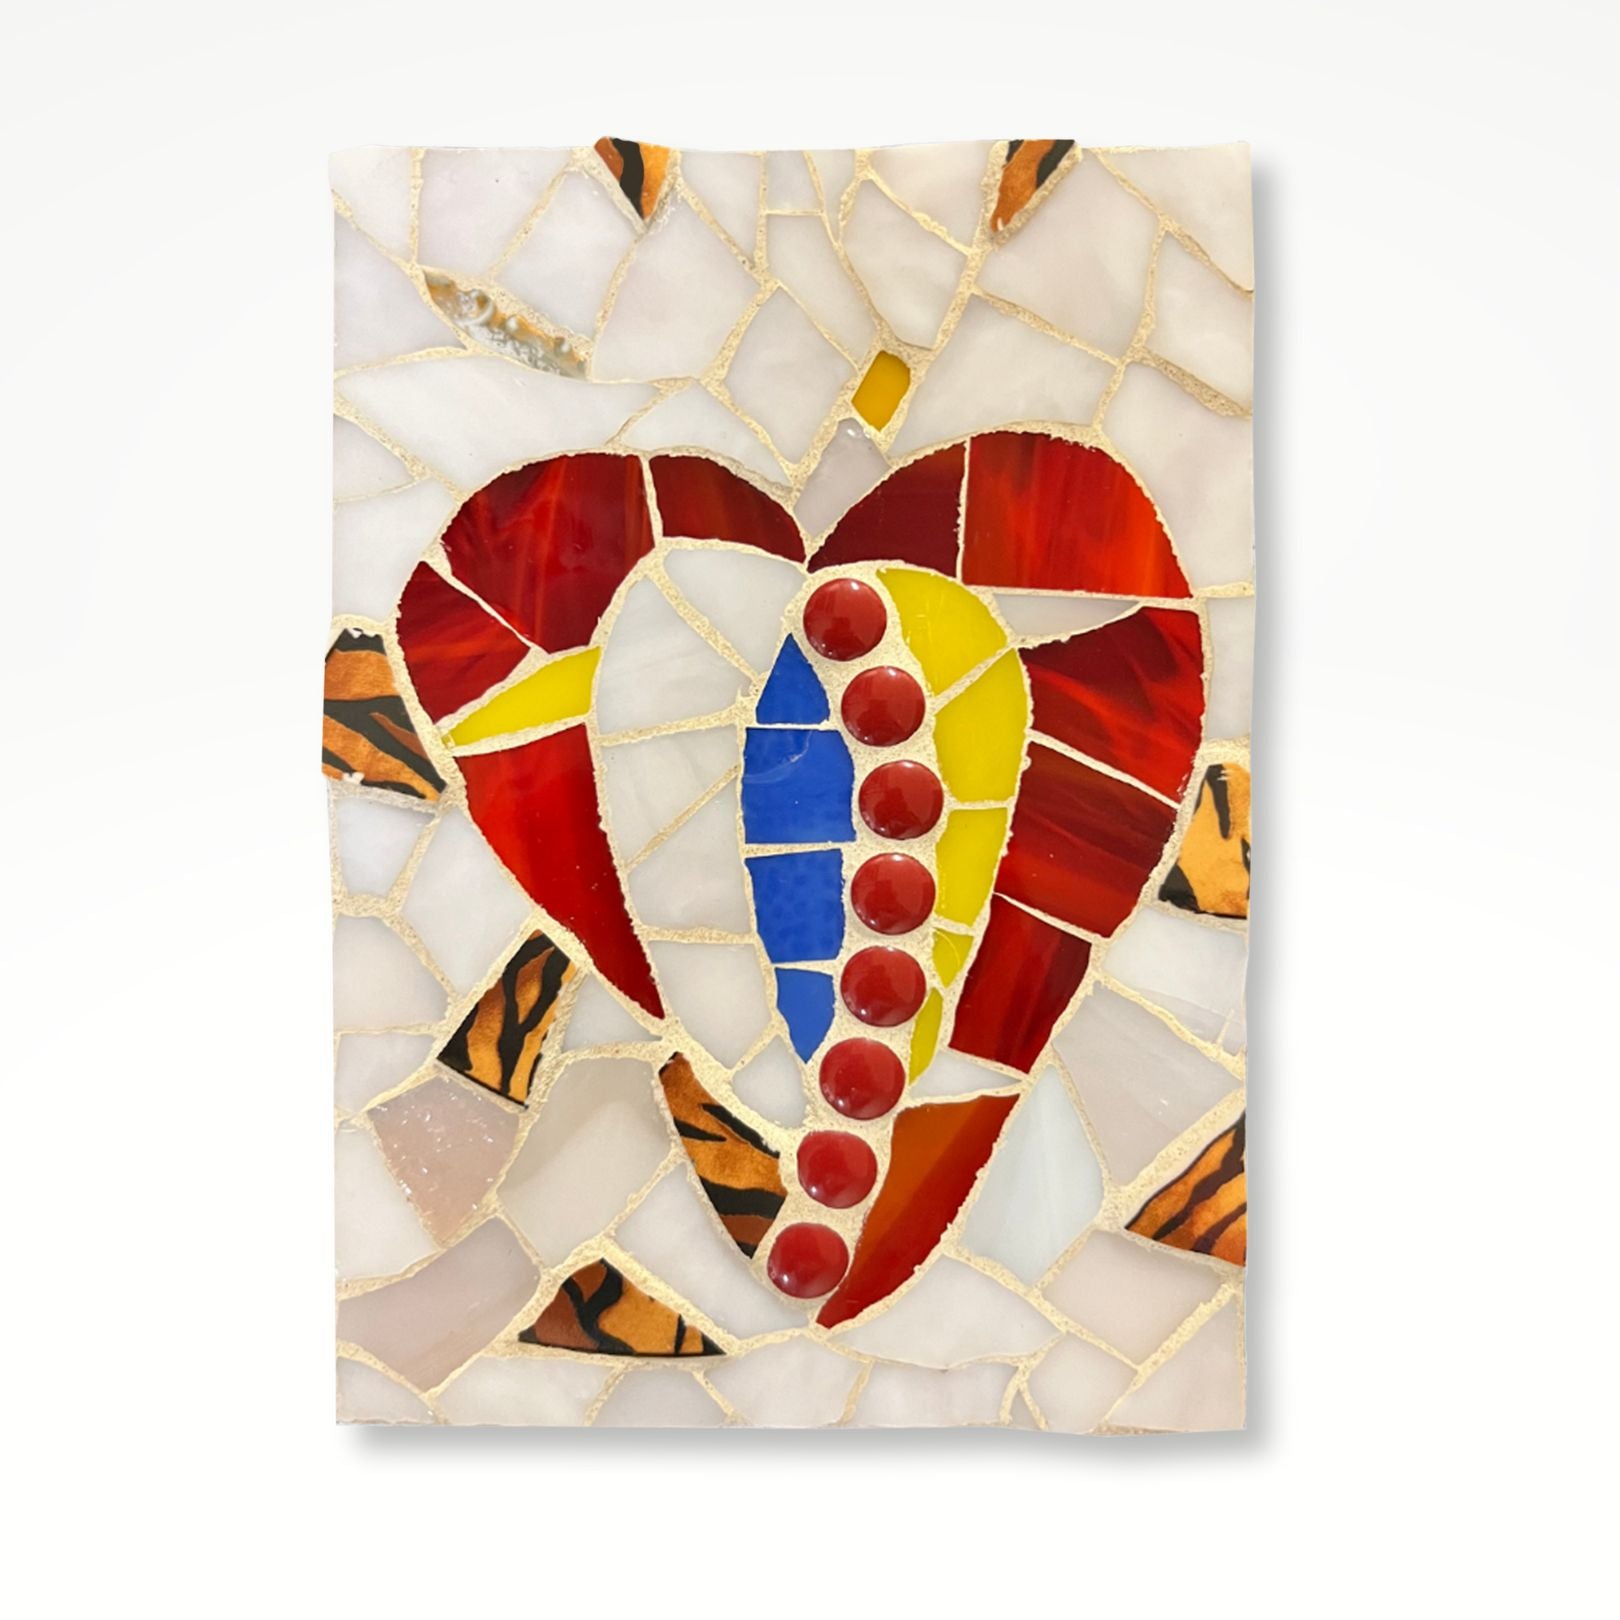 Abstract mosaic heart made up of red, blue, and yellow pieces with a muted pearly background and golden accents. 